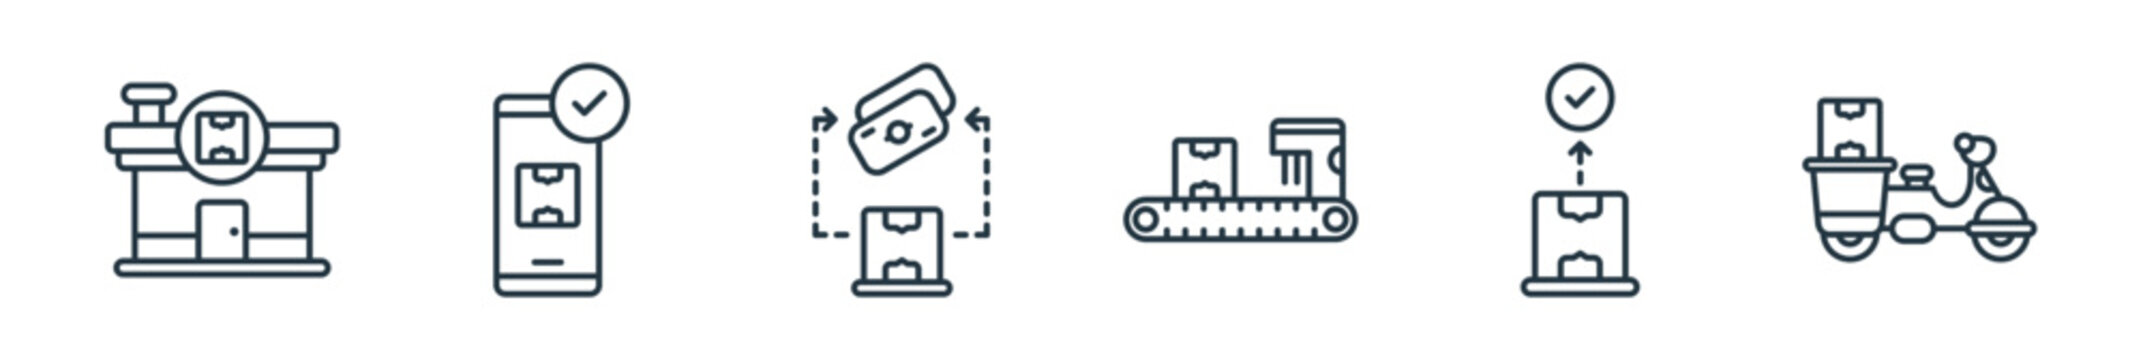 outline set of shipping and delivery line icons. linear vector icons such as warehouse, smartphone, cash on delivery, conveyor belt, package, delivery bike. vector illustration.